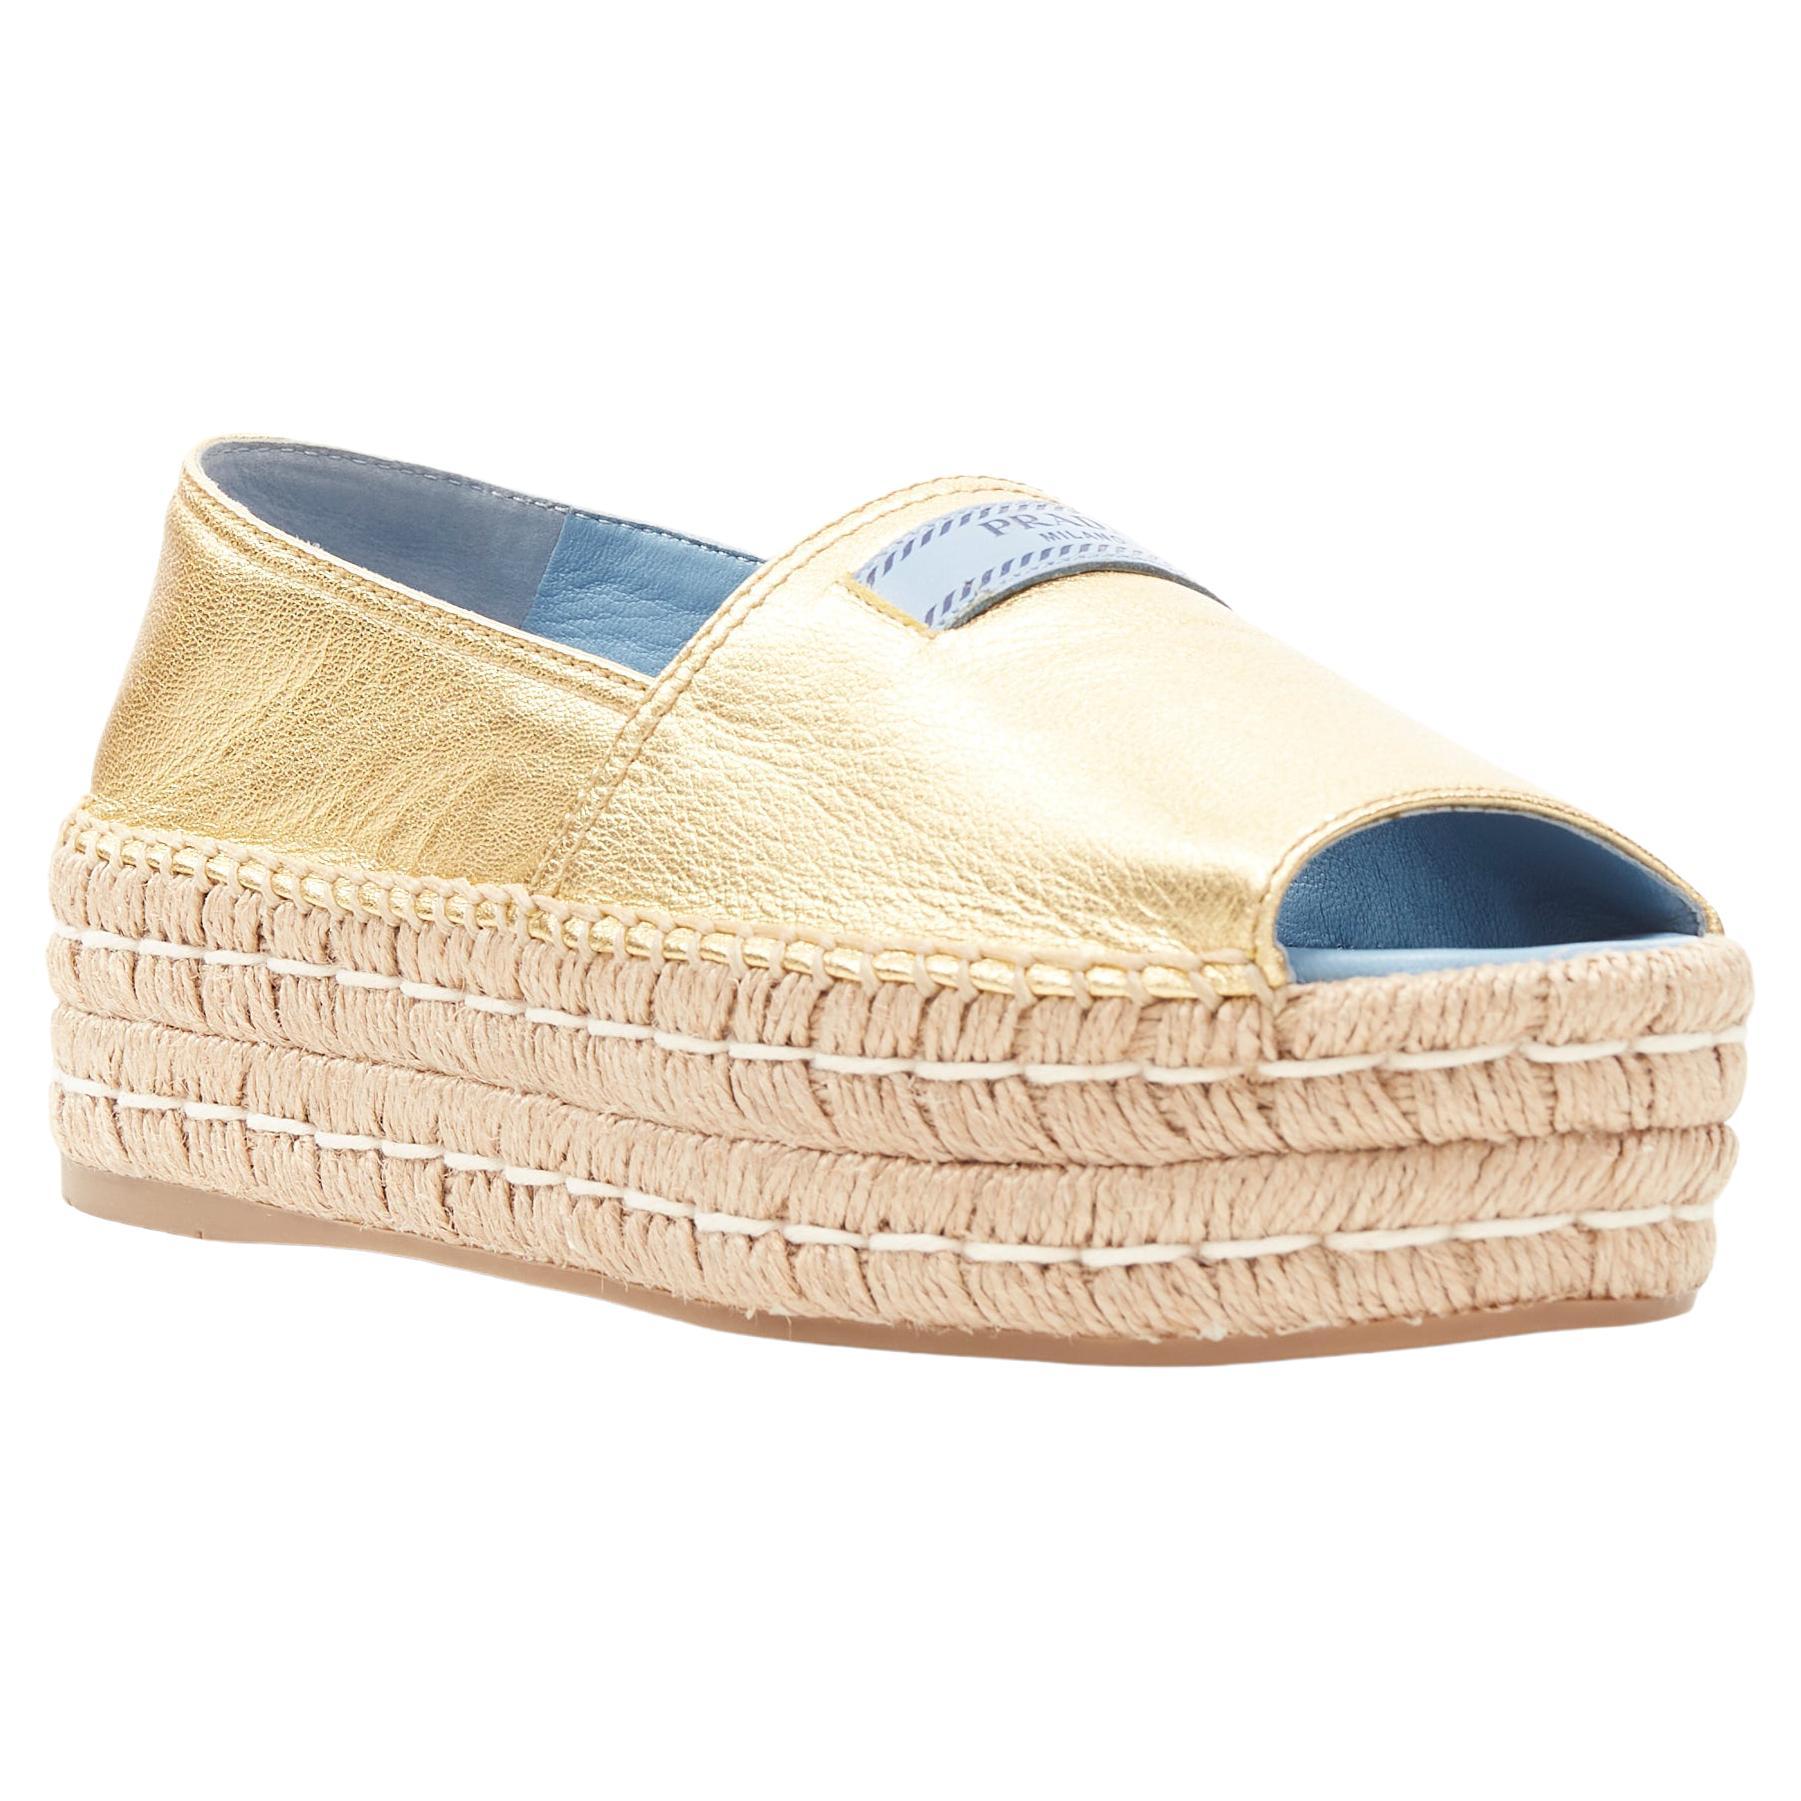 Louis Vuitton Womens Wedge Sandals 38 1/2 US8.5 Gold Glitter Rope